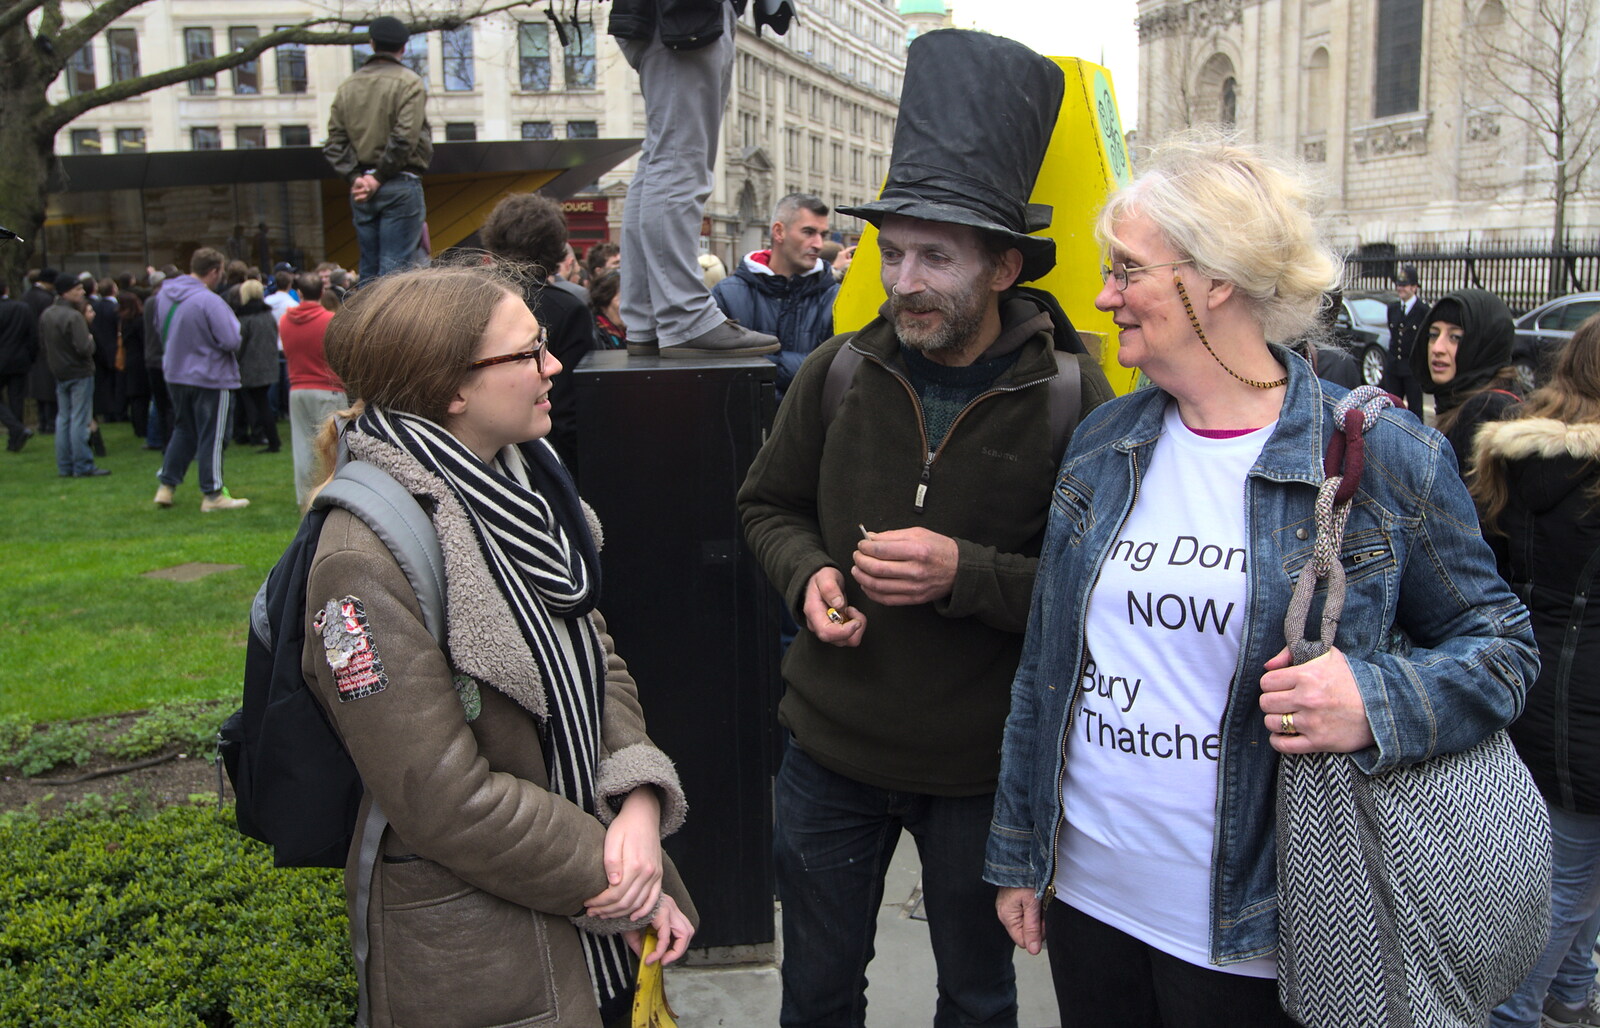 The anti-Thatcherites are quizzed by a student from Margaret Thatcher's Funeral, St. Paul's, London - 17th April 2013